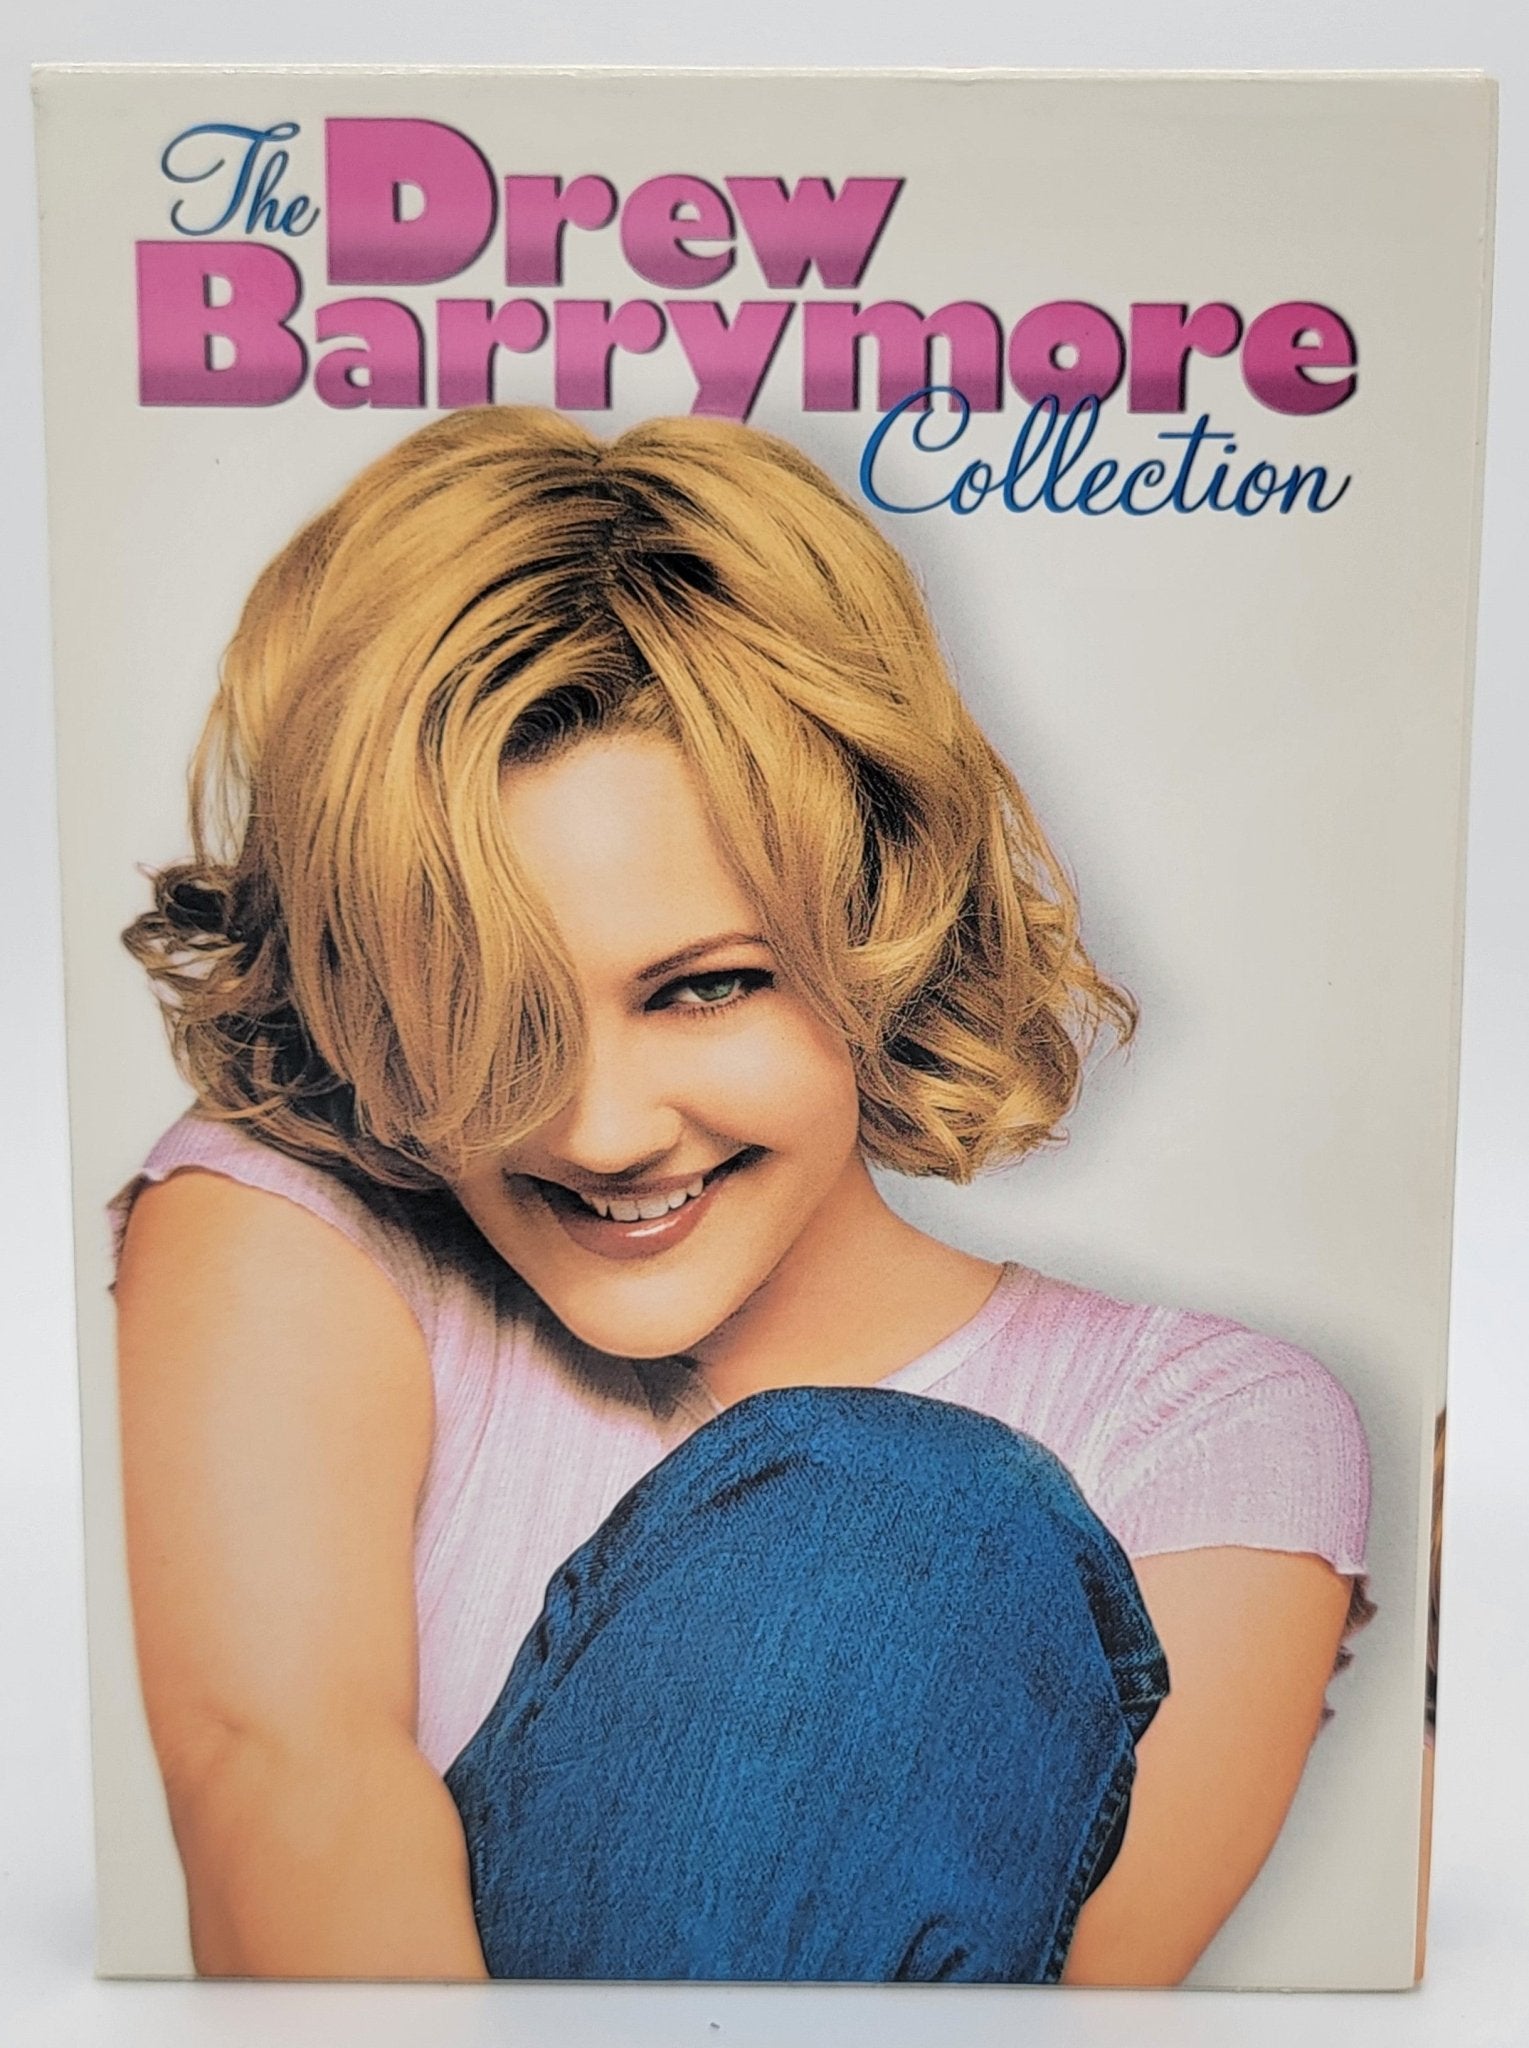 20th Century Fox Home Entertainment - The Drew Barrymore Collection | DVD | 3 Movie Set - DVD - Steady Bunny Shop